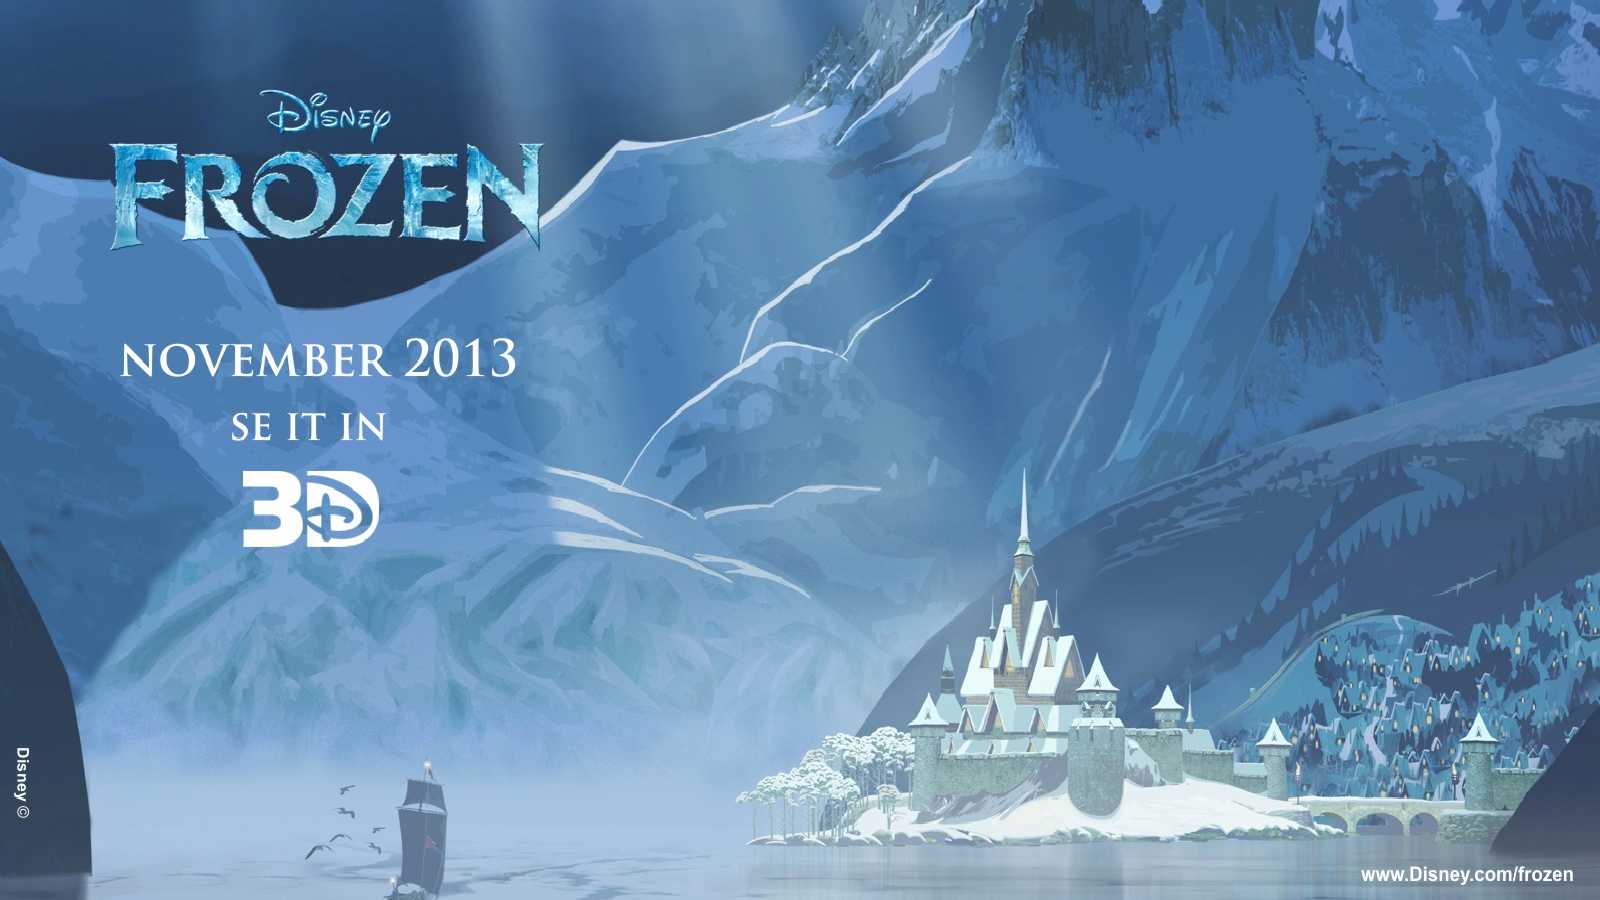 Frozen Image HD Wallpaper And Background Photos